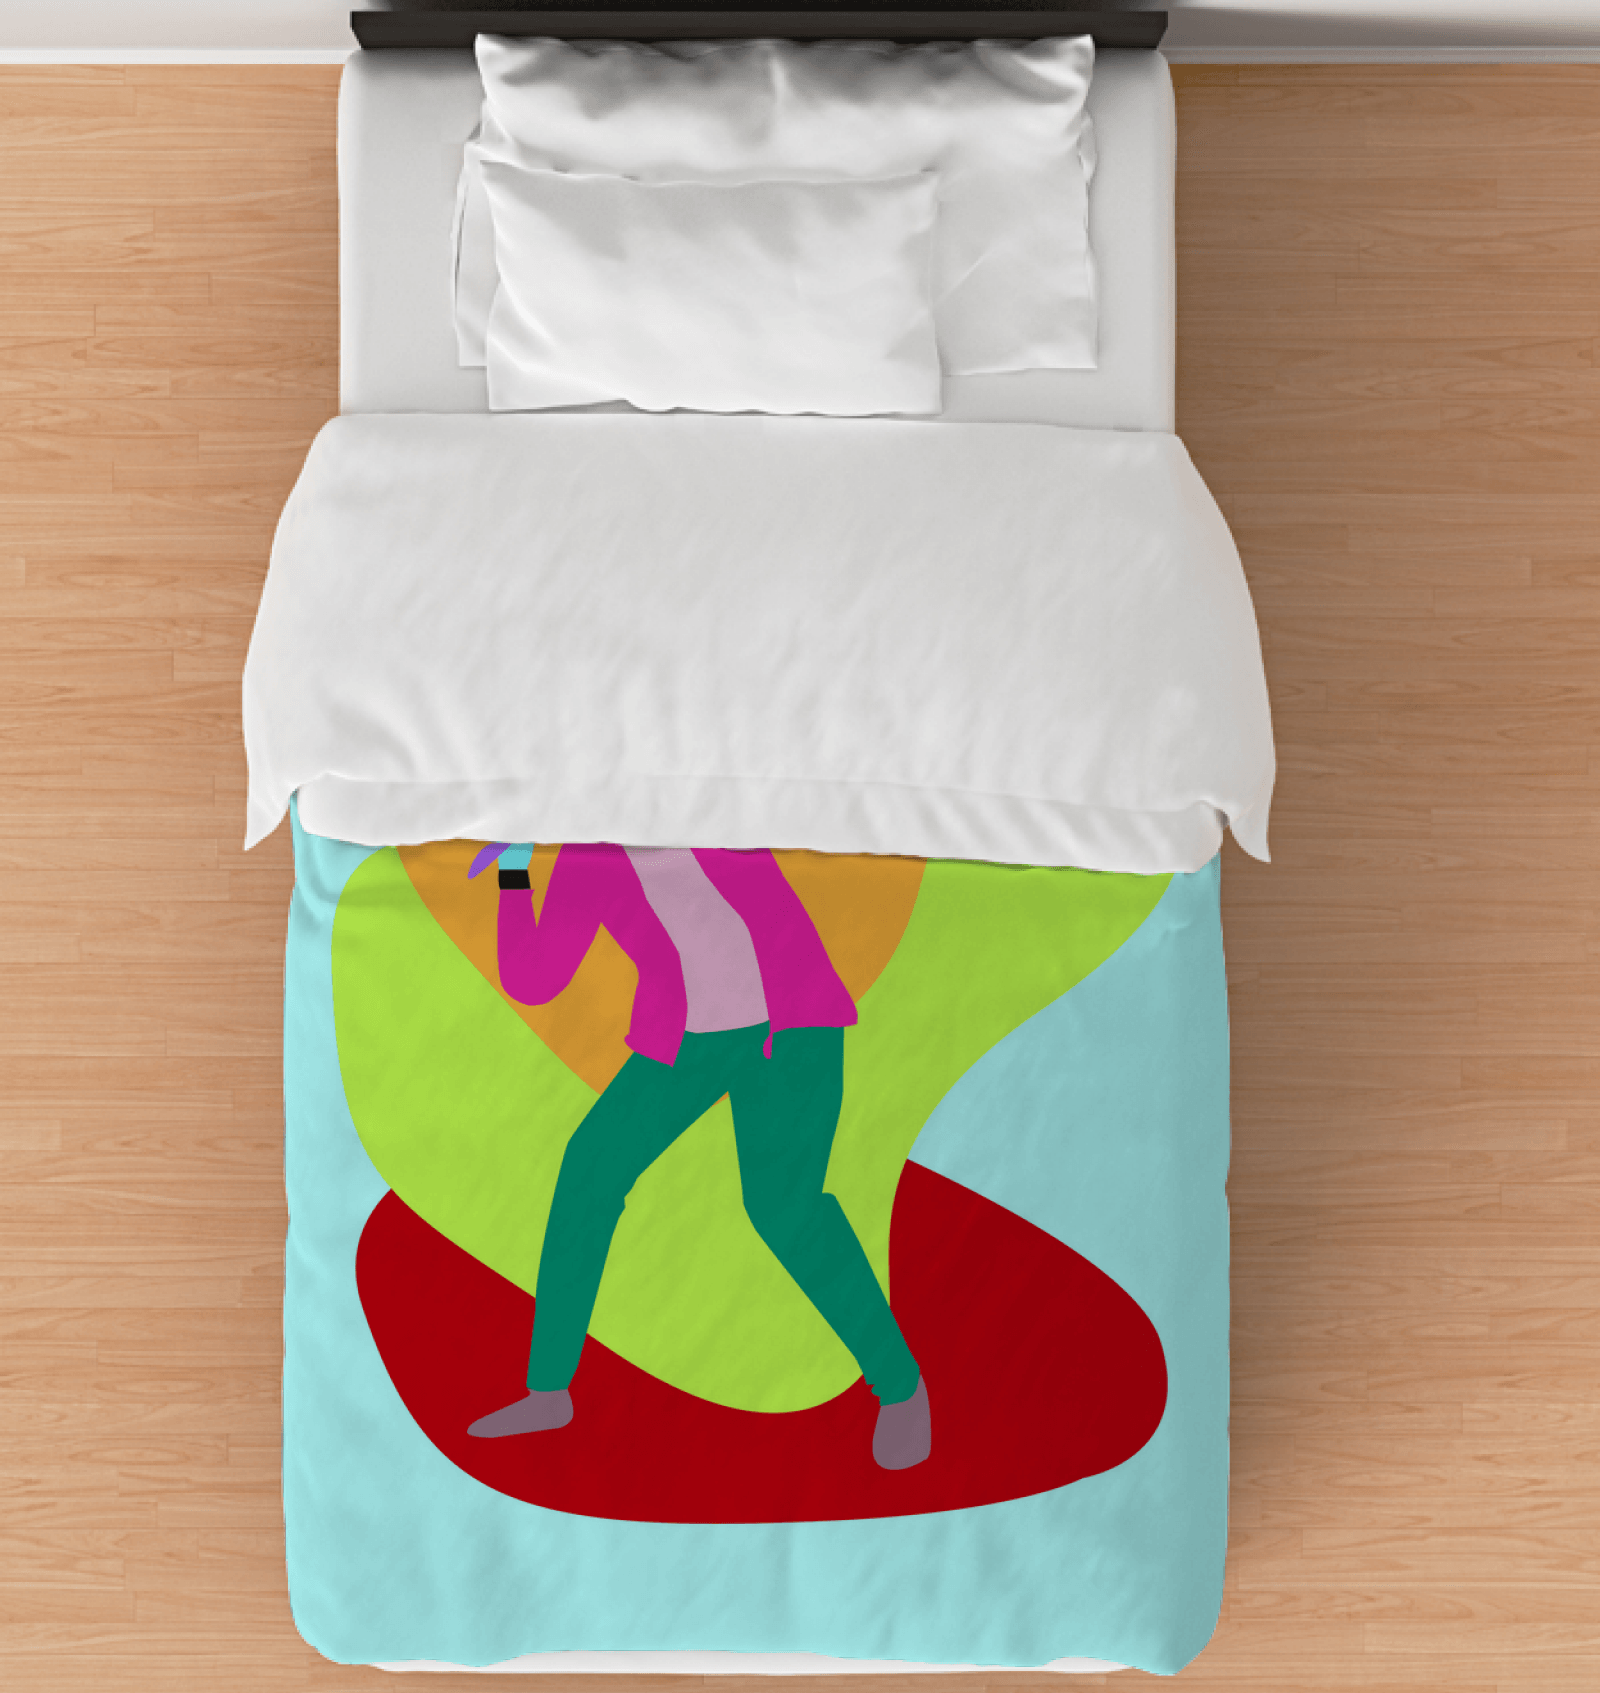 The Singing Duvet Cover - Beyond T-shirts